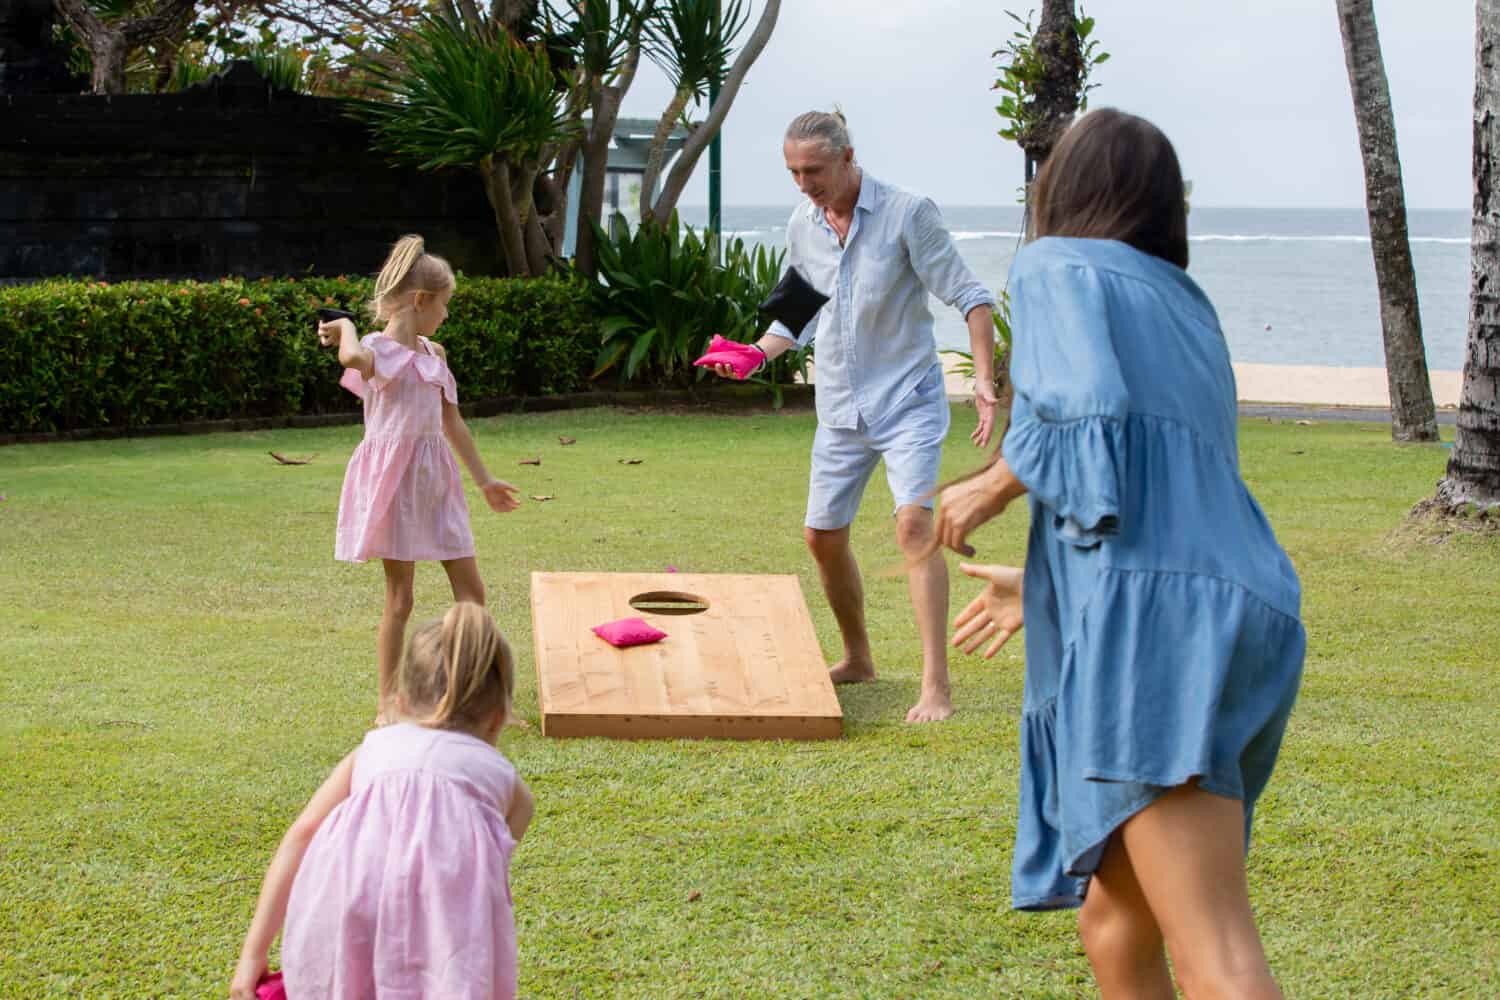 Family playing cornhole game by the sea on sunny summer day. Parents and children playing bean bag toss